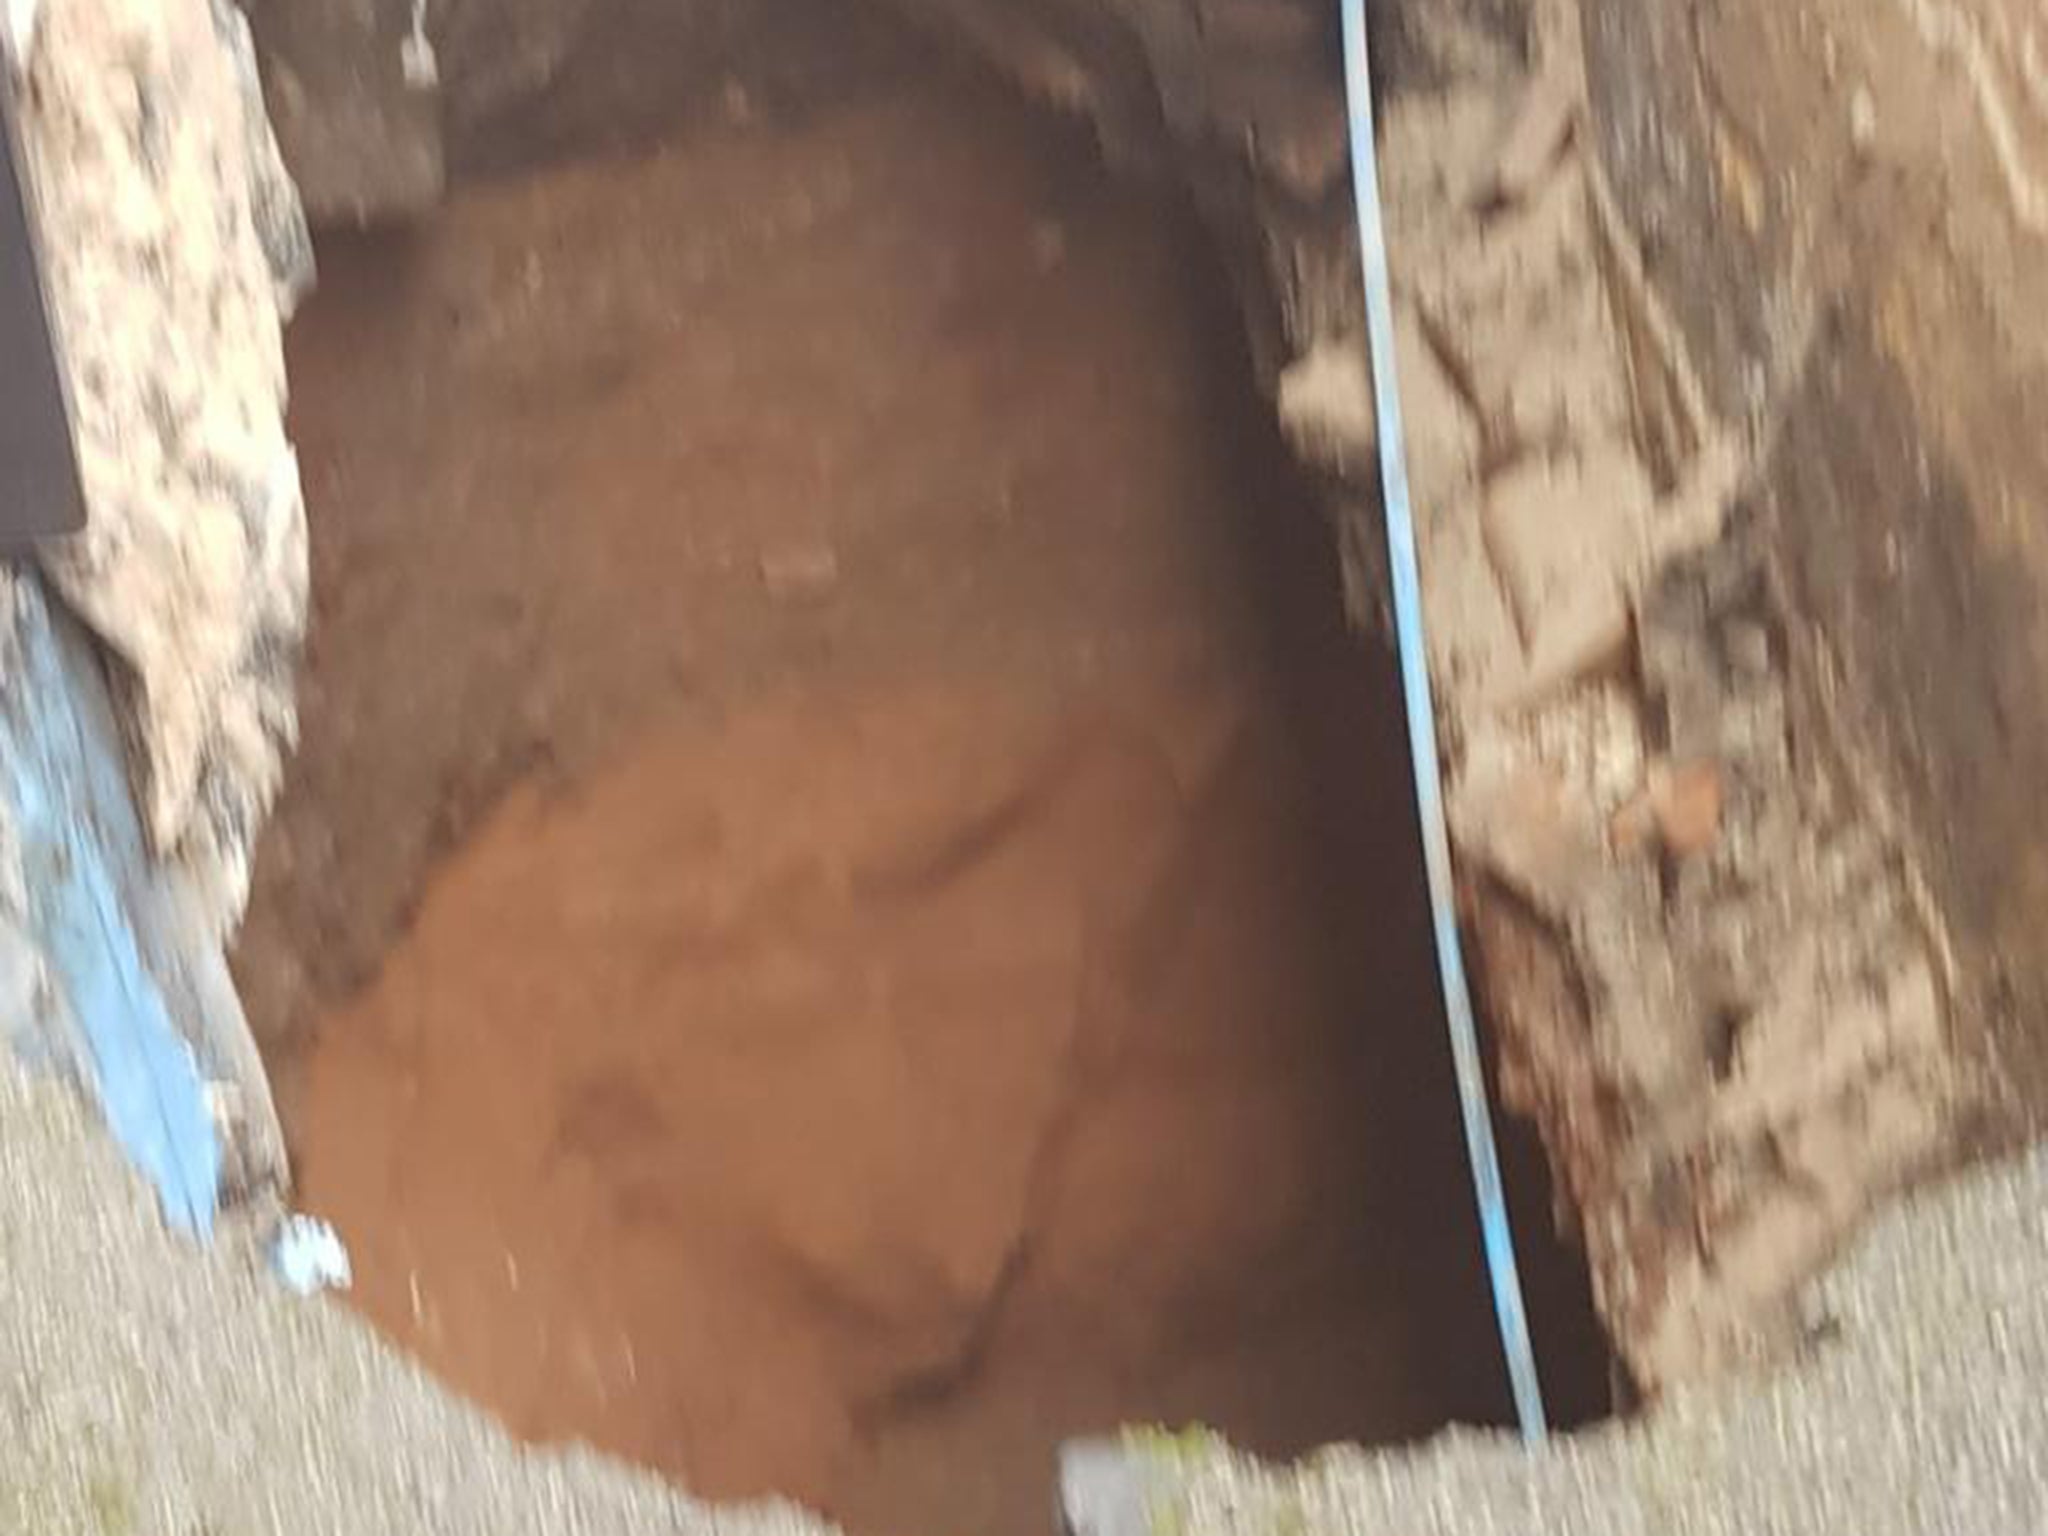 Supermarket Evacuated After Sinkhole Appears The Independent